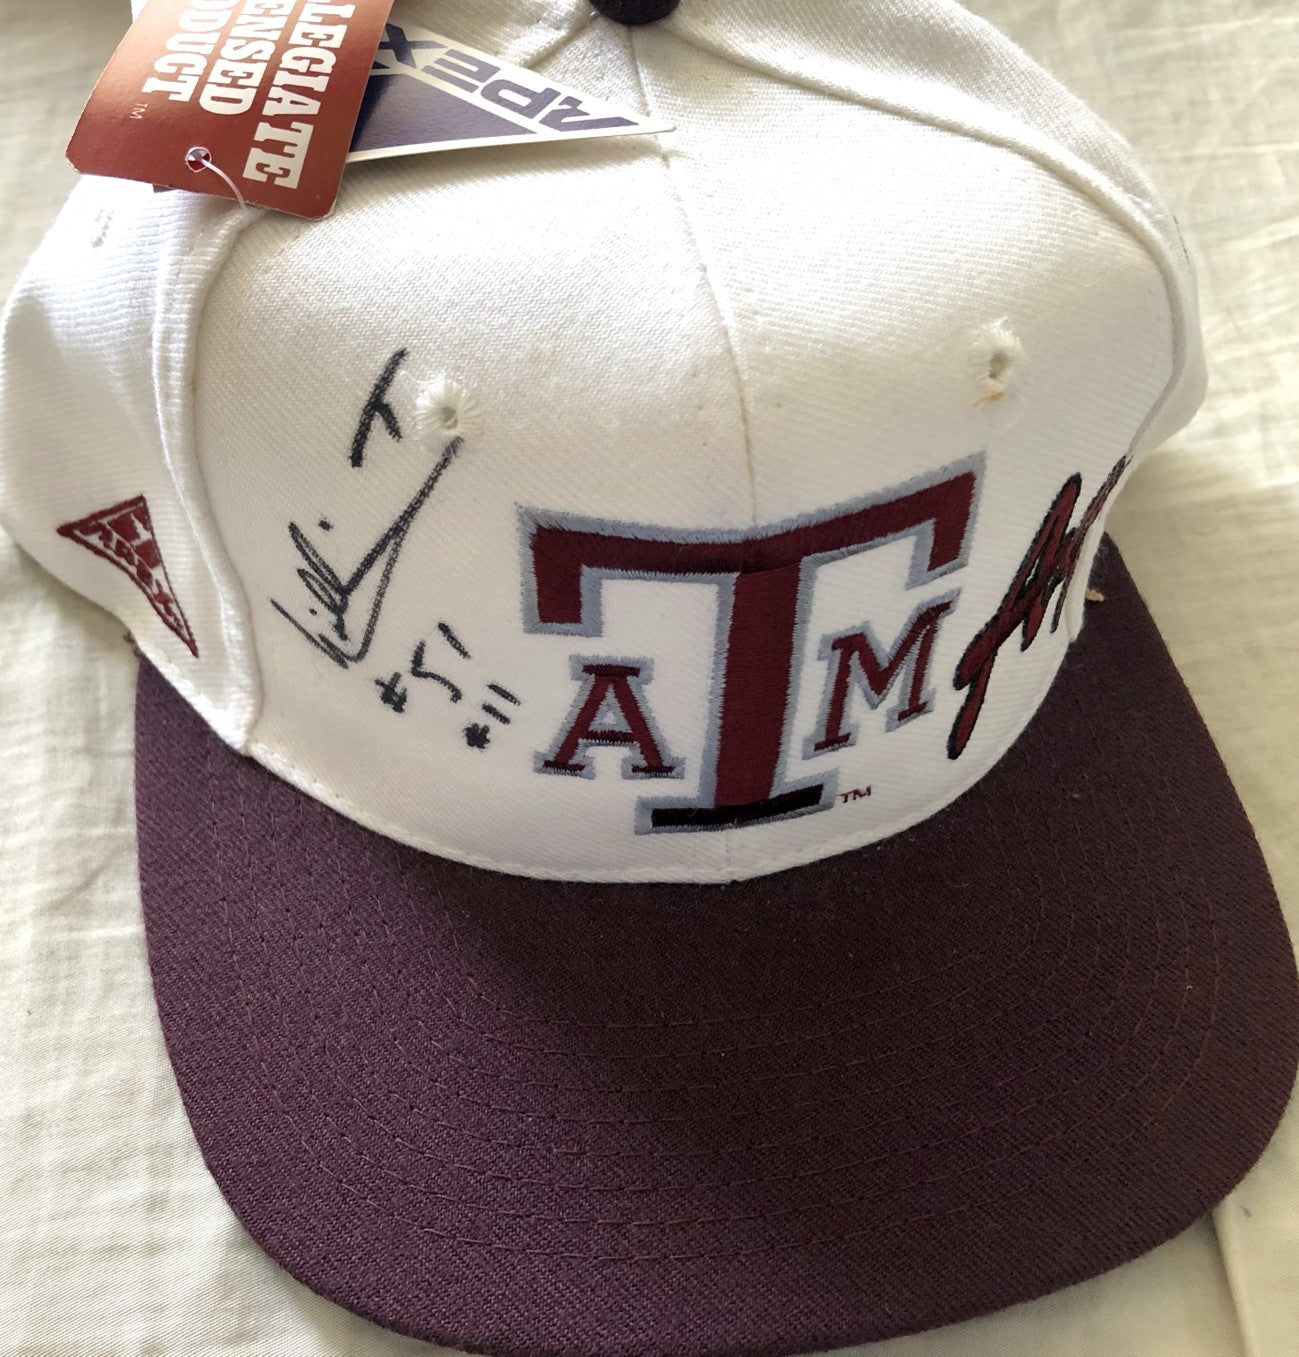 William Thomas autographed Texas A&M Aggies cap or hat